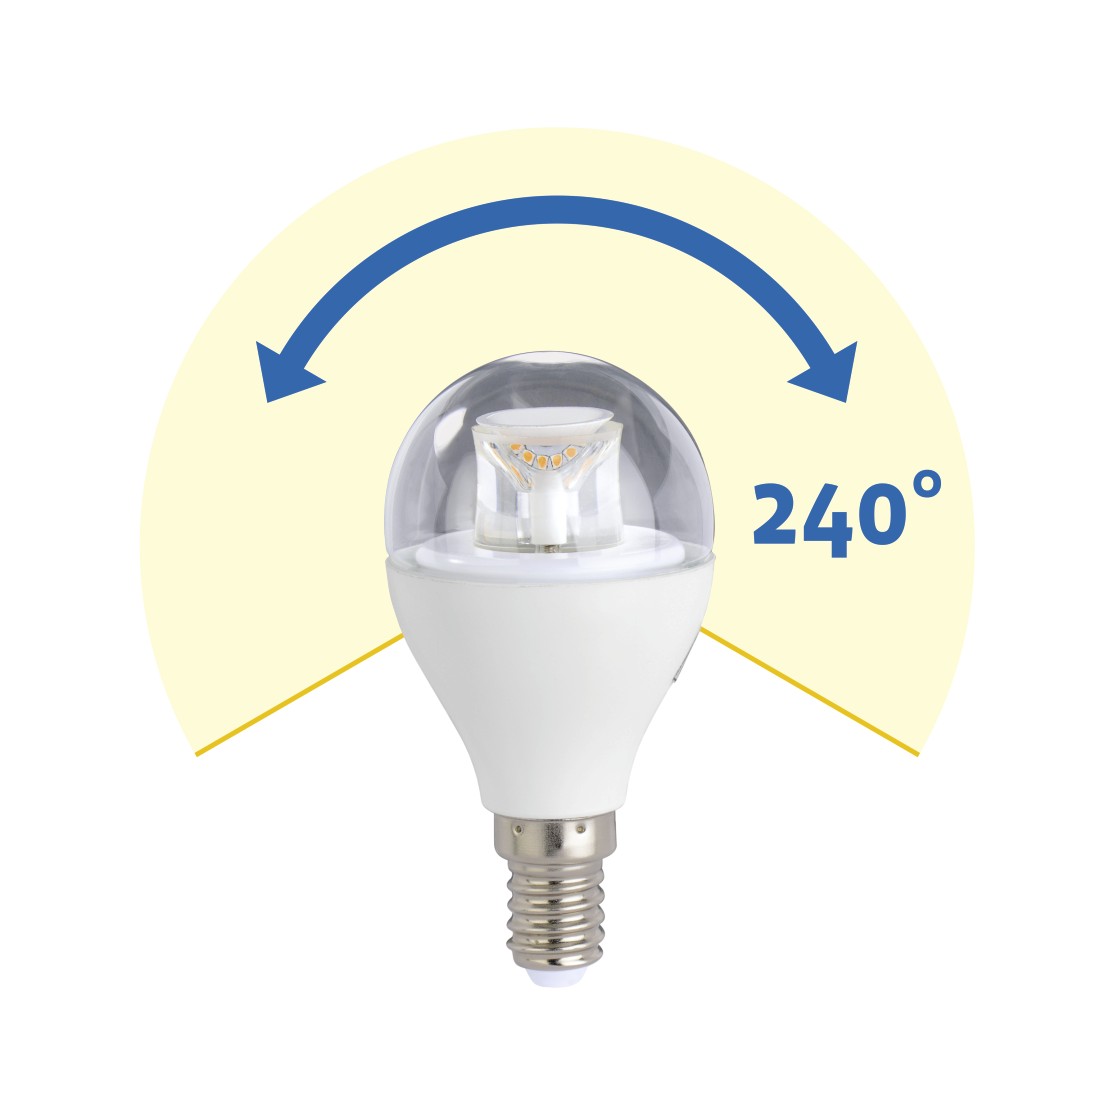 awx High-Res Appliance - Xavax, LED Bulb, E14, 470lm replaces 40W, drop bulb, warm white, dimmable